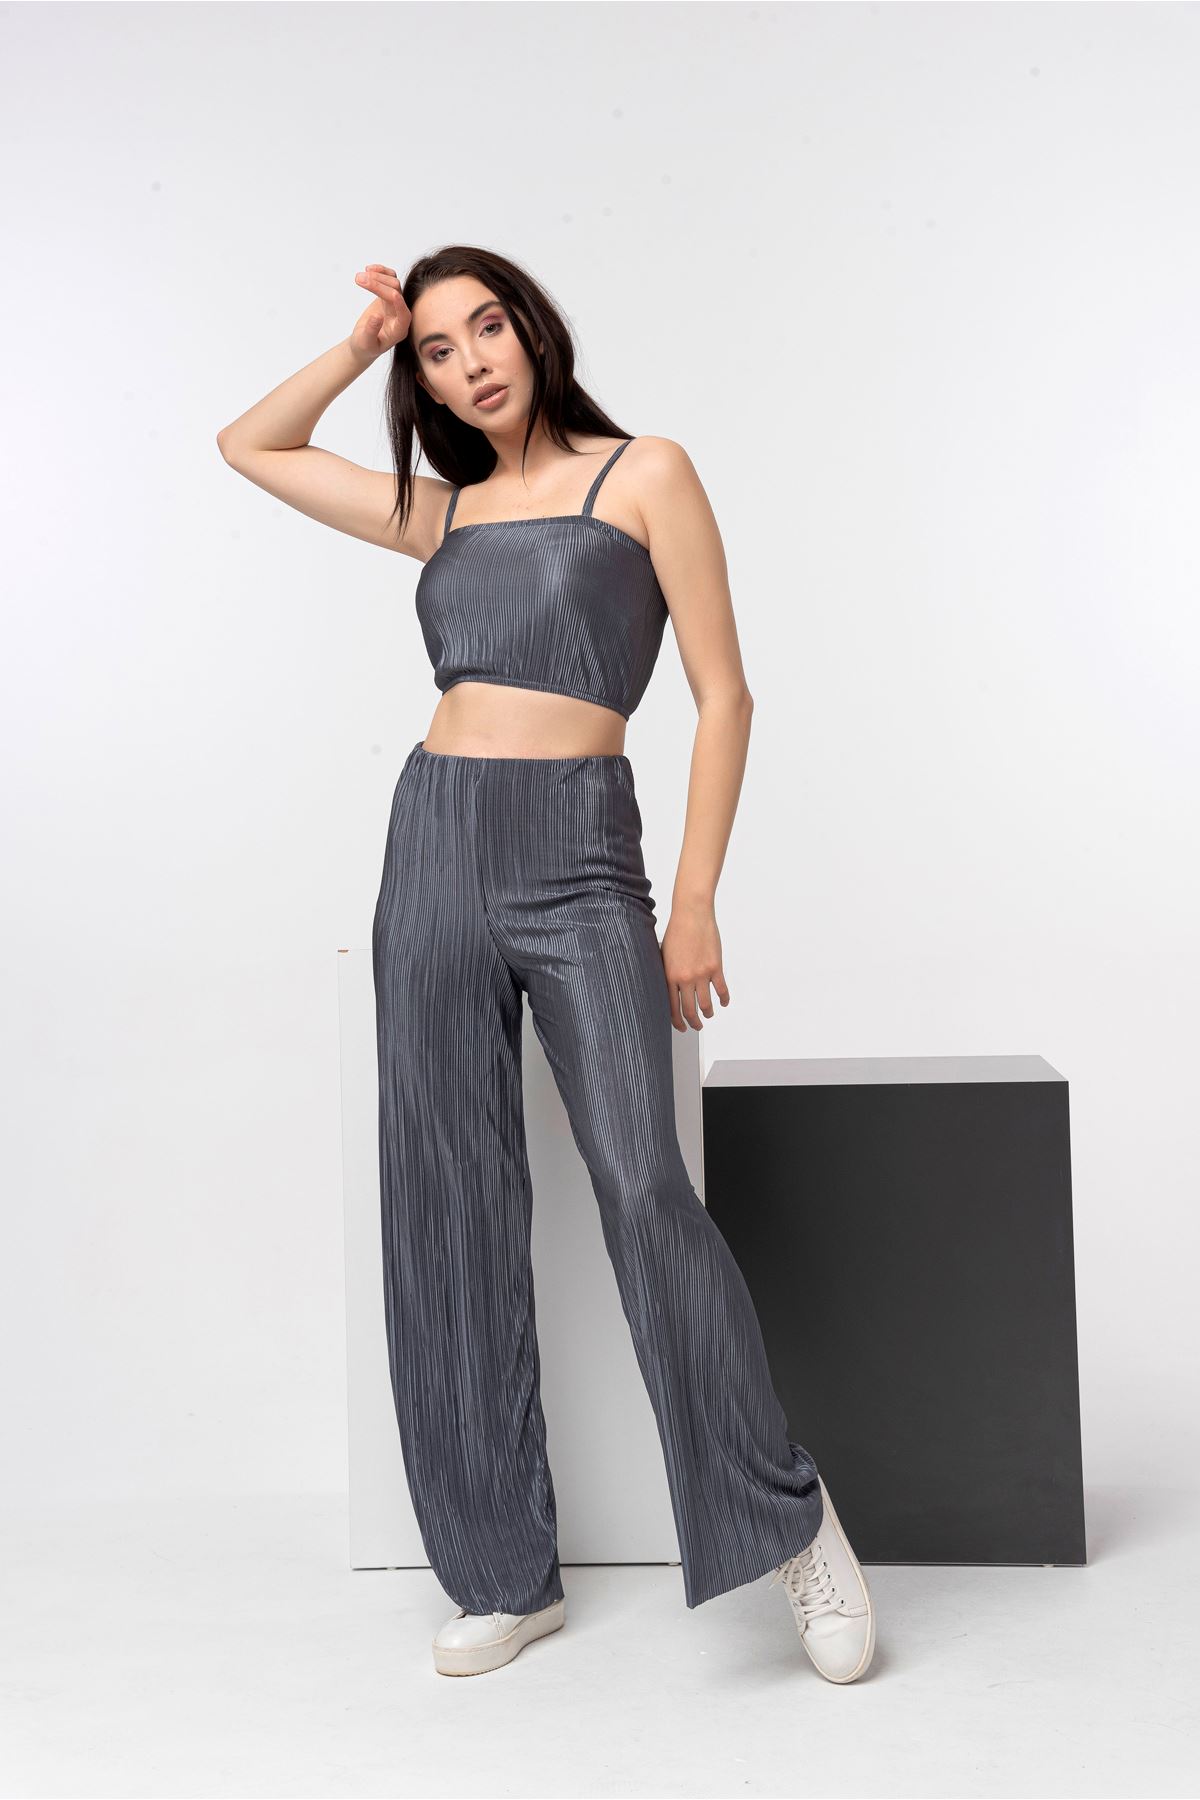 Crepe Fabric Sleeveless Spaghetti Neck Tight Fit Pleated Women Crop - Anthracite 